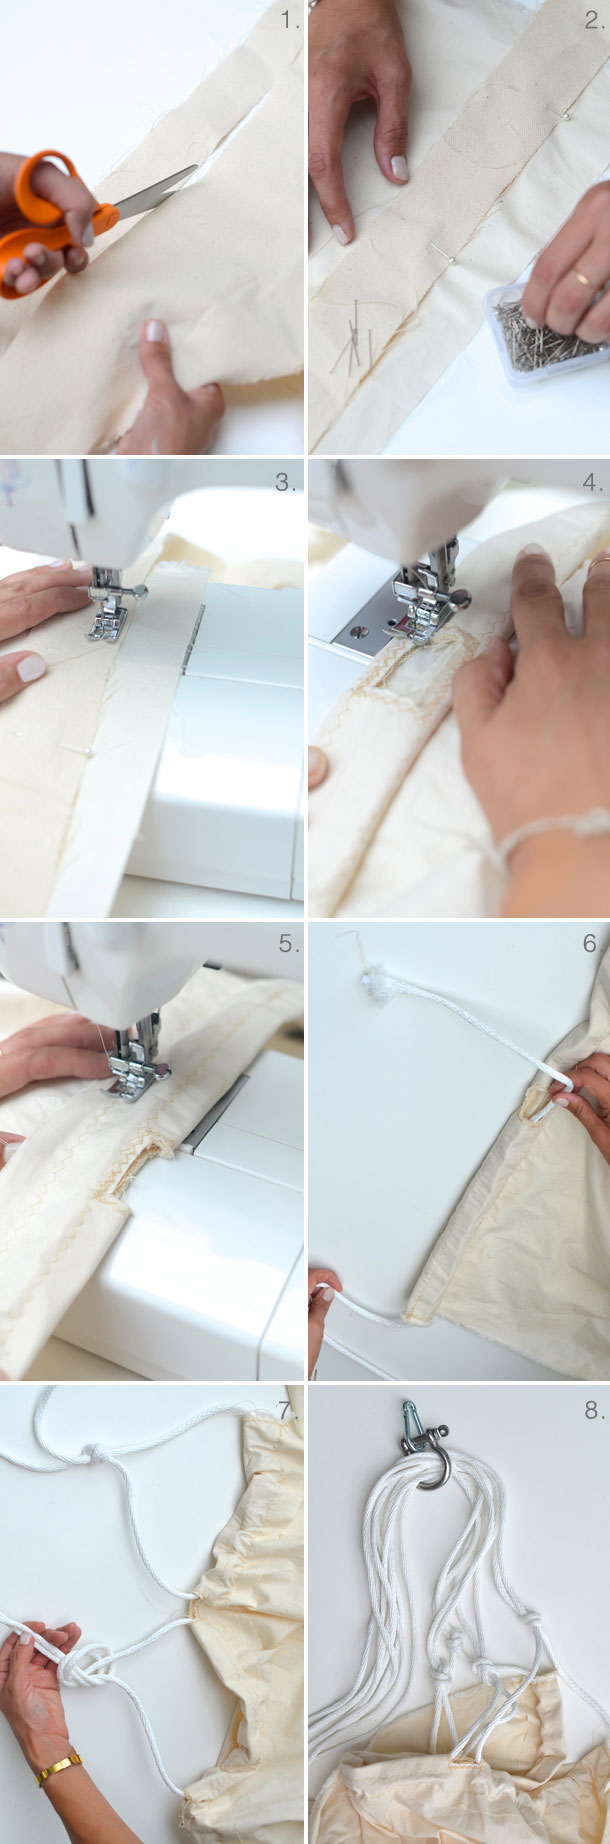 DIY Hammock | Claire Zinnecker for Camille Styles